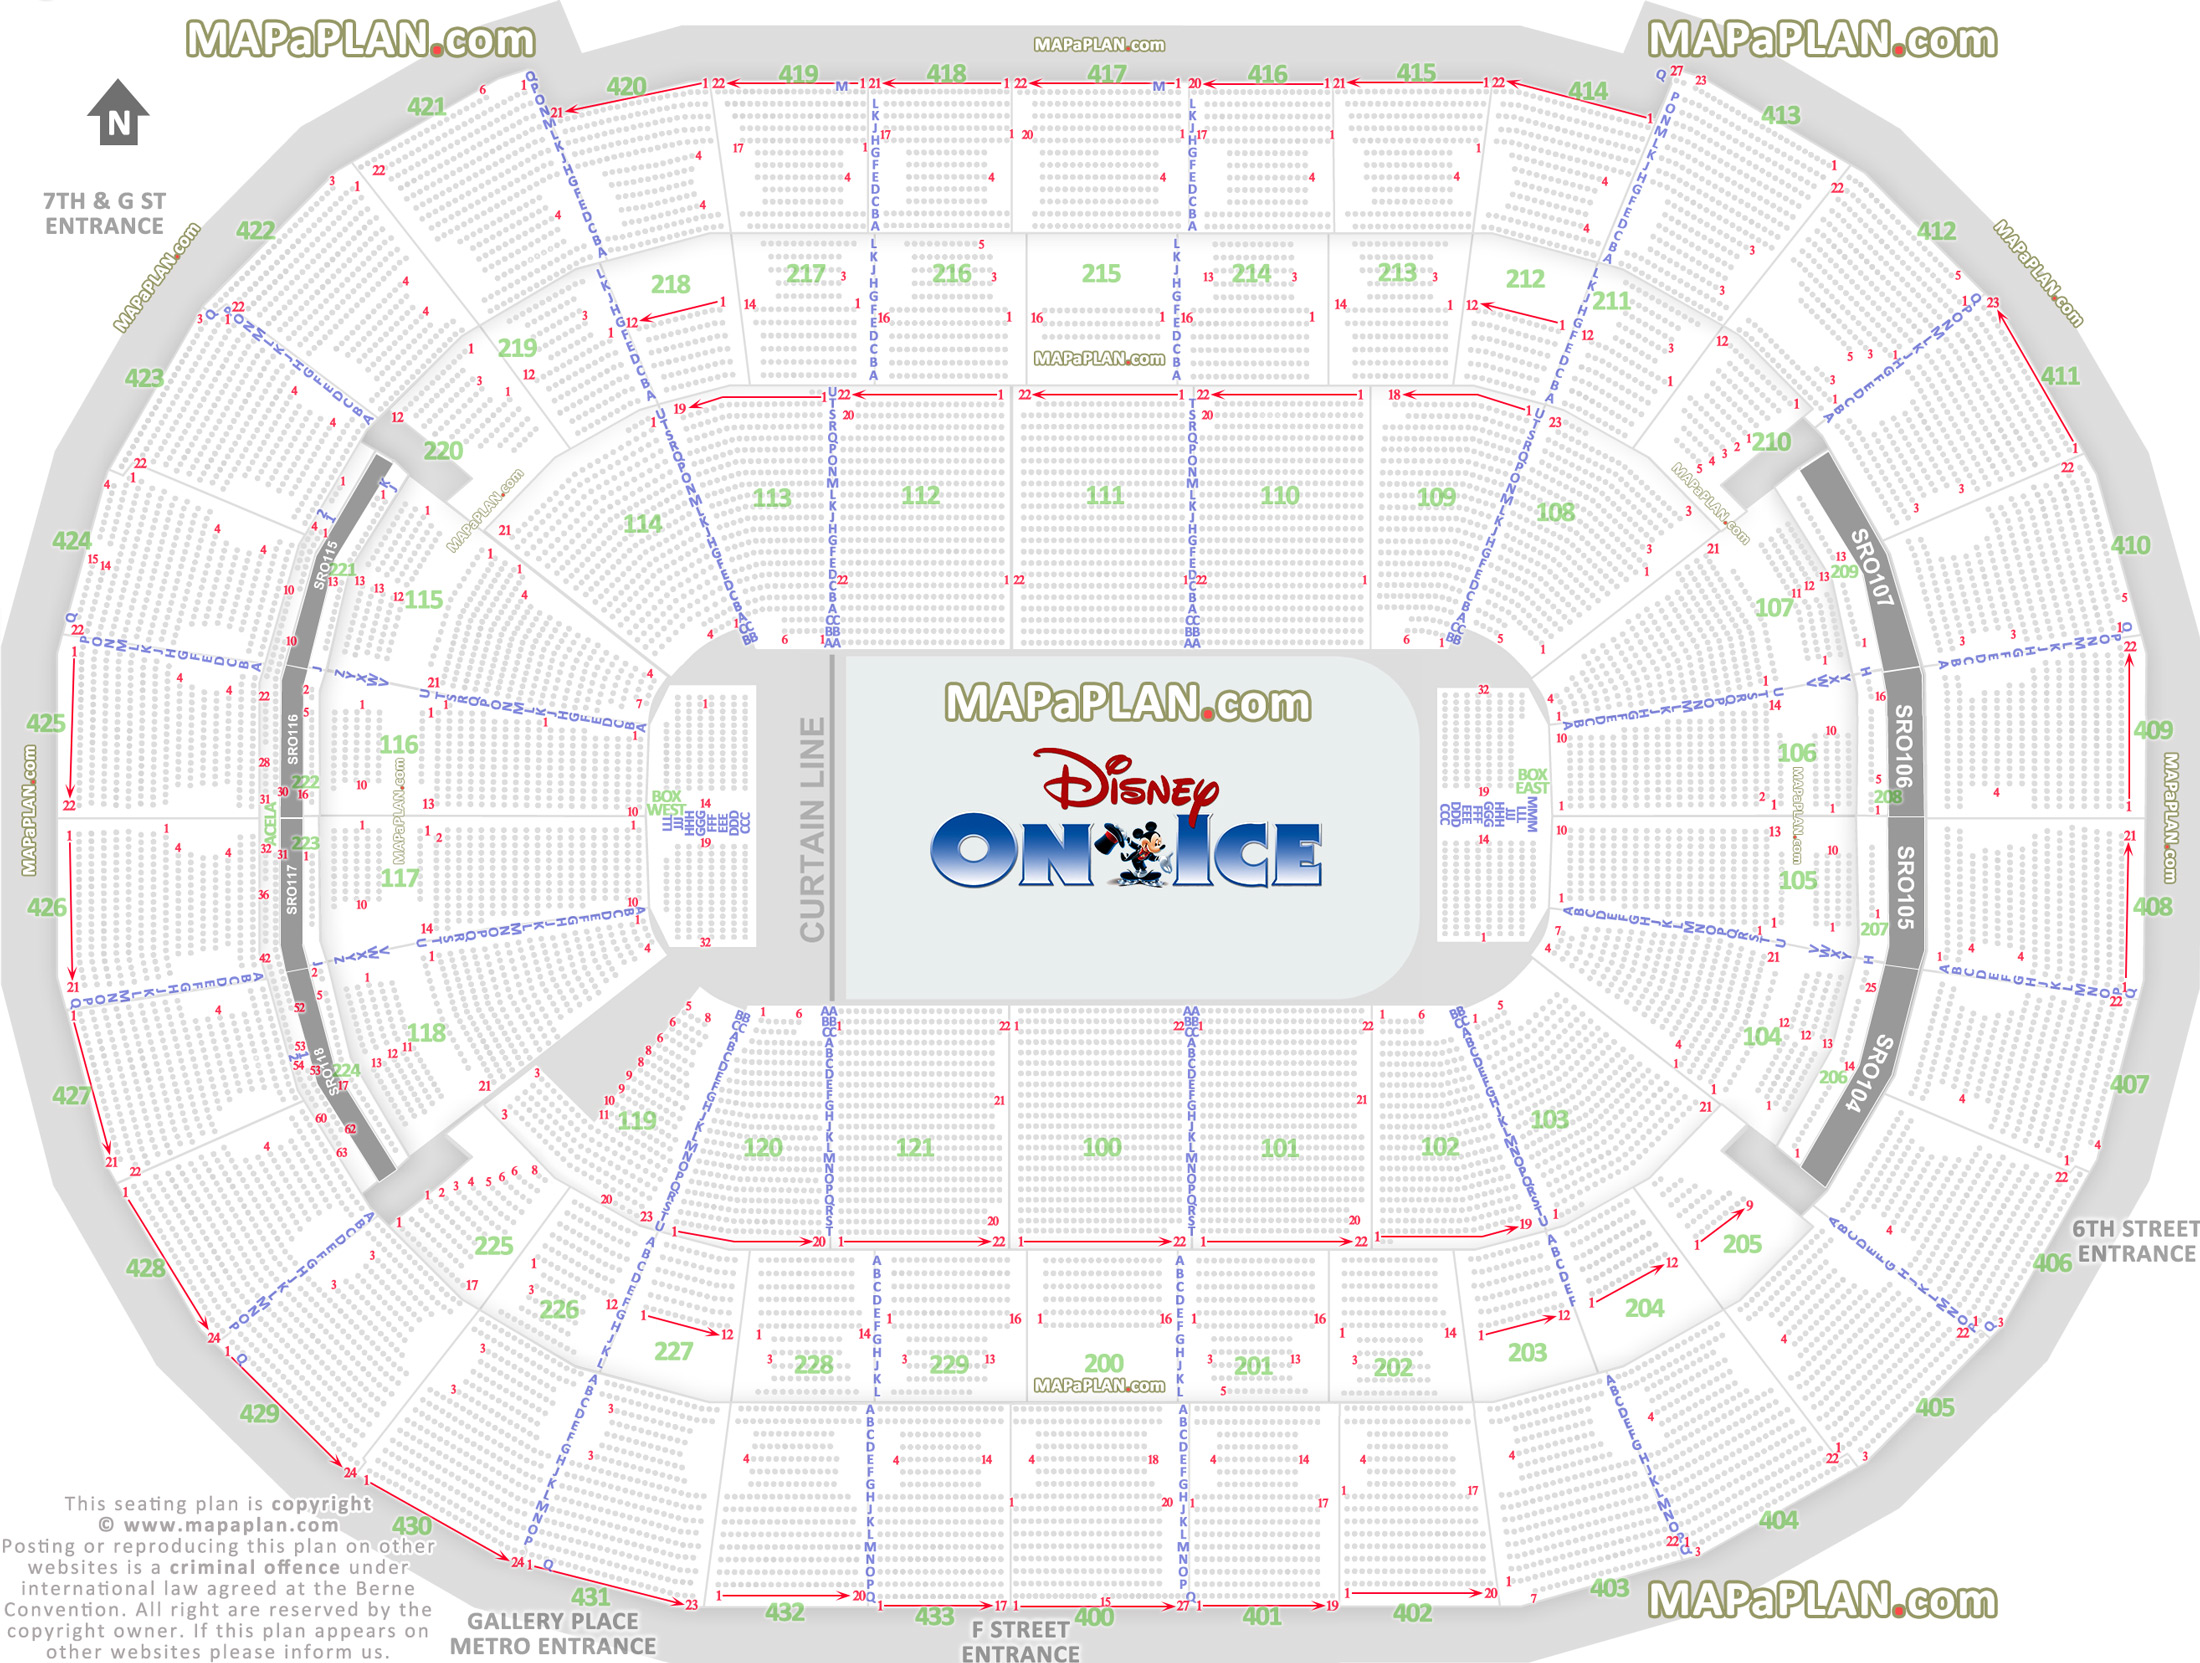 Wizards Seating Chart With Rows